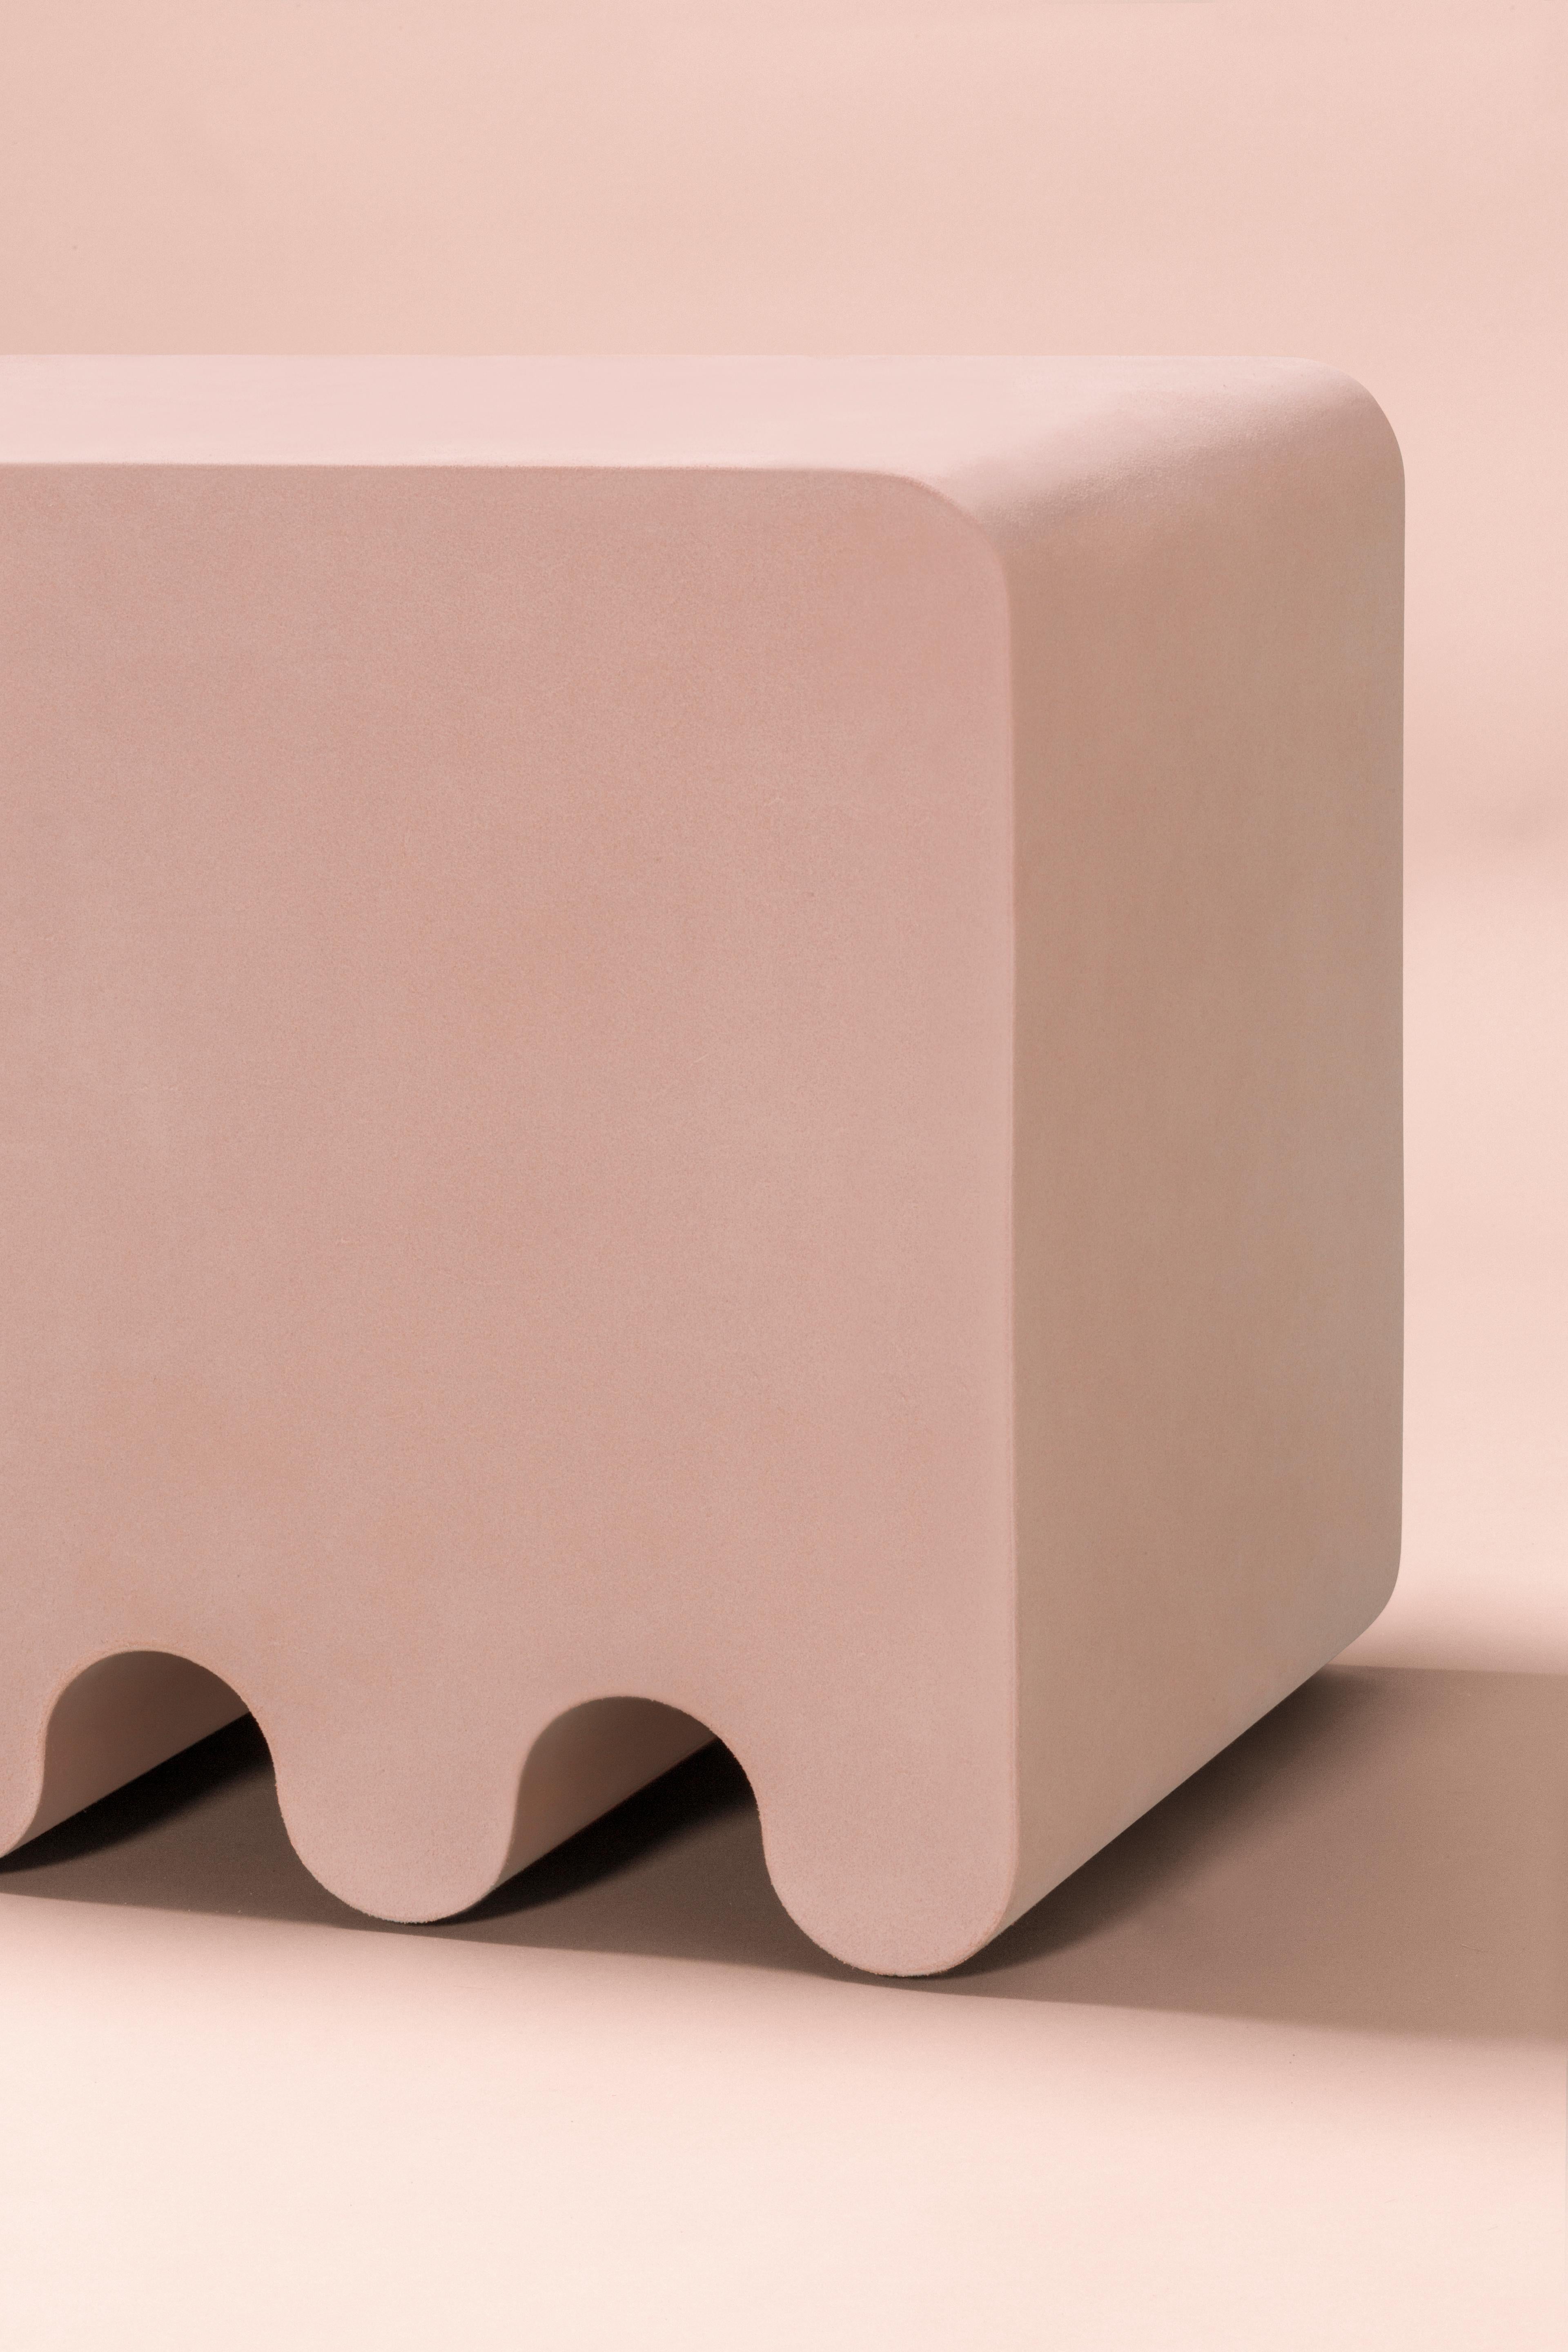 Ossicle Leather Stool -- Francesco Balzano x Giobagnara

Available in a suede finish. Pictured here is the stool in A91 Nude suede finish.

For simple and sophisticated leather and marble products, look no further than the Francesco Balzano line.